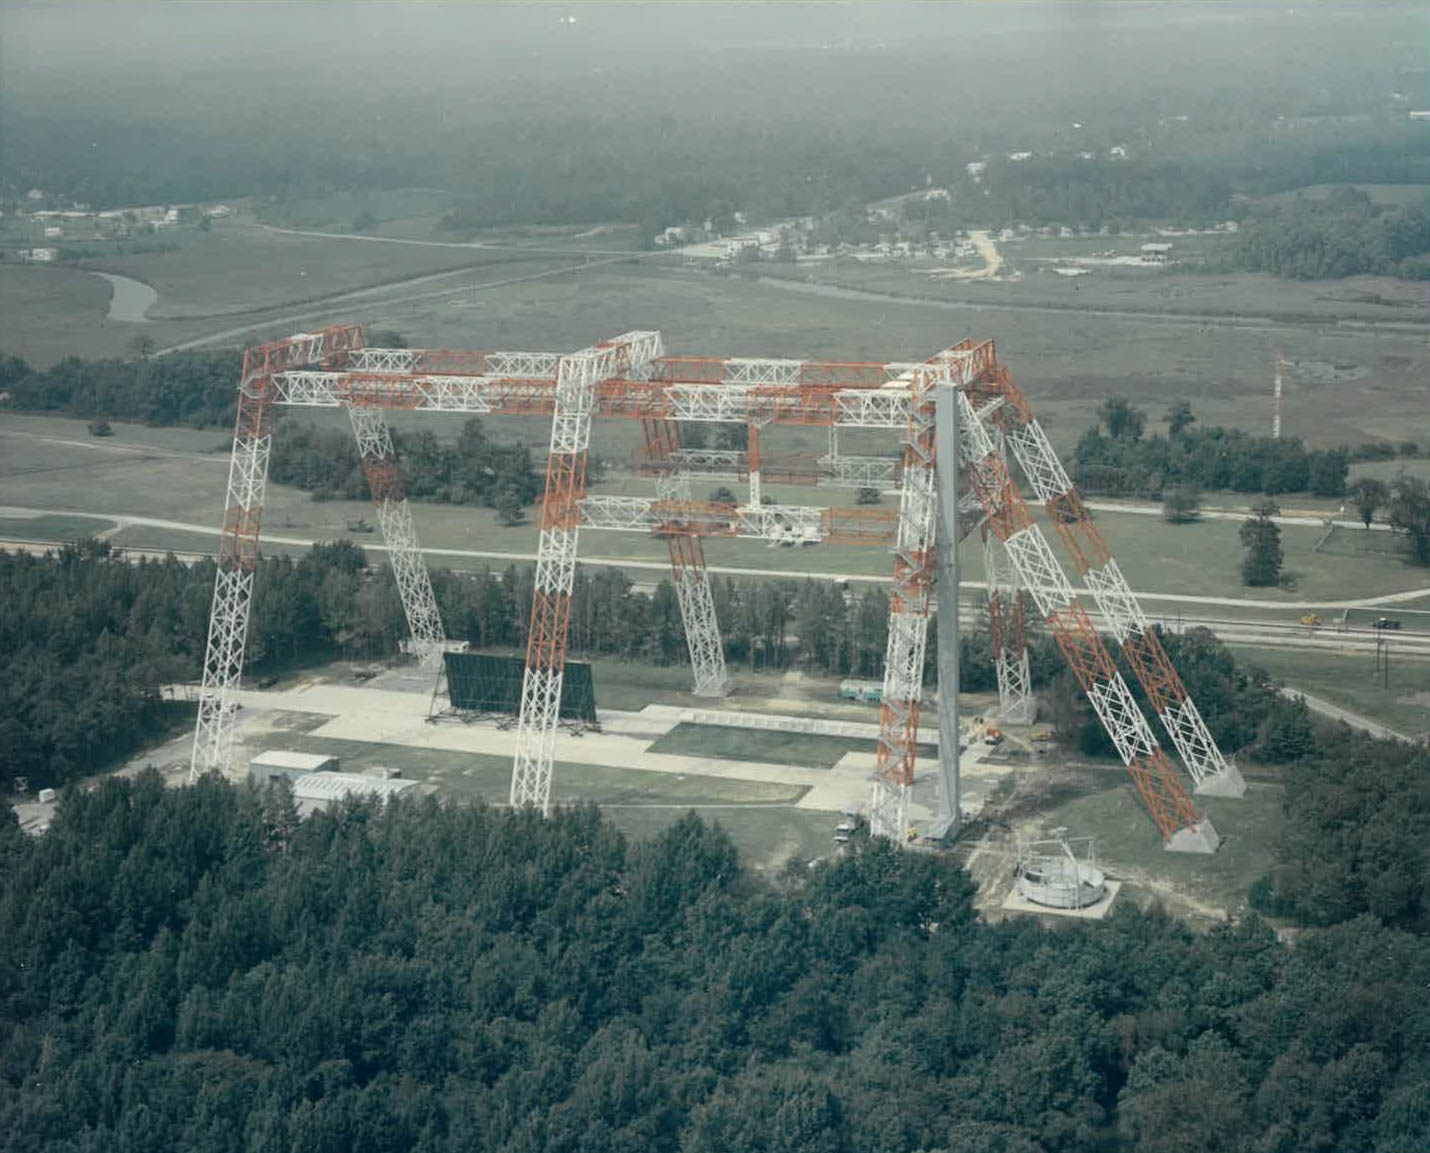 The Gantry at NASA's Langley Research Center